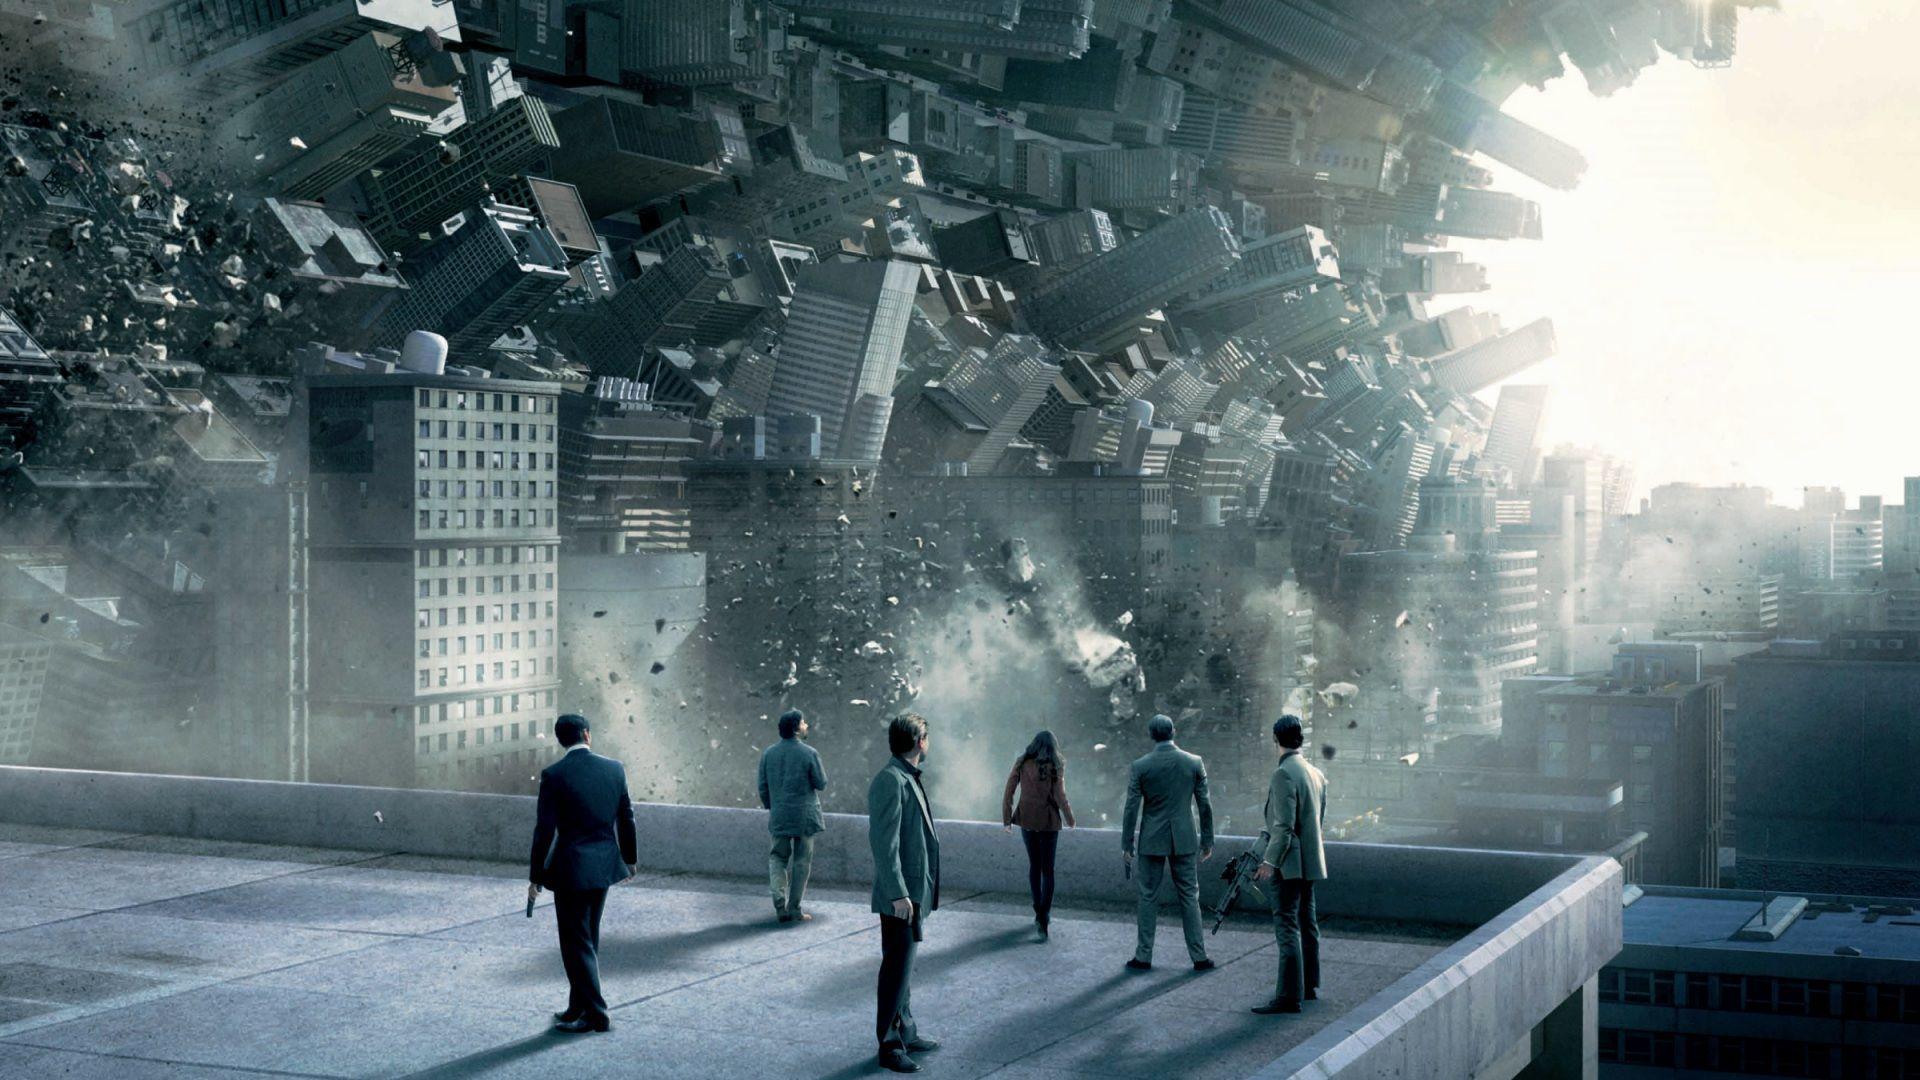 Movie Inception Wallpaper 1920x1080 px Free Download